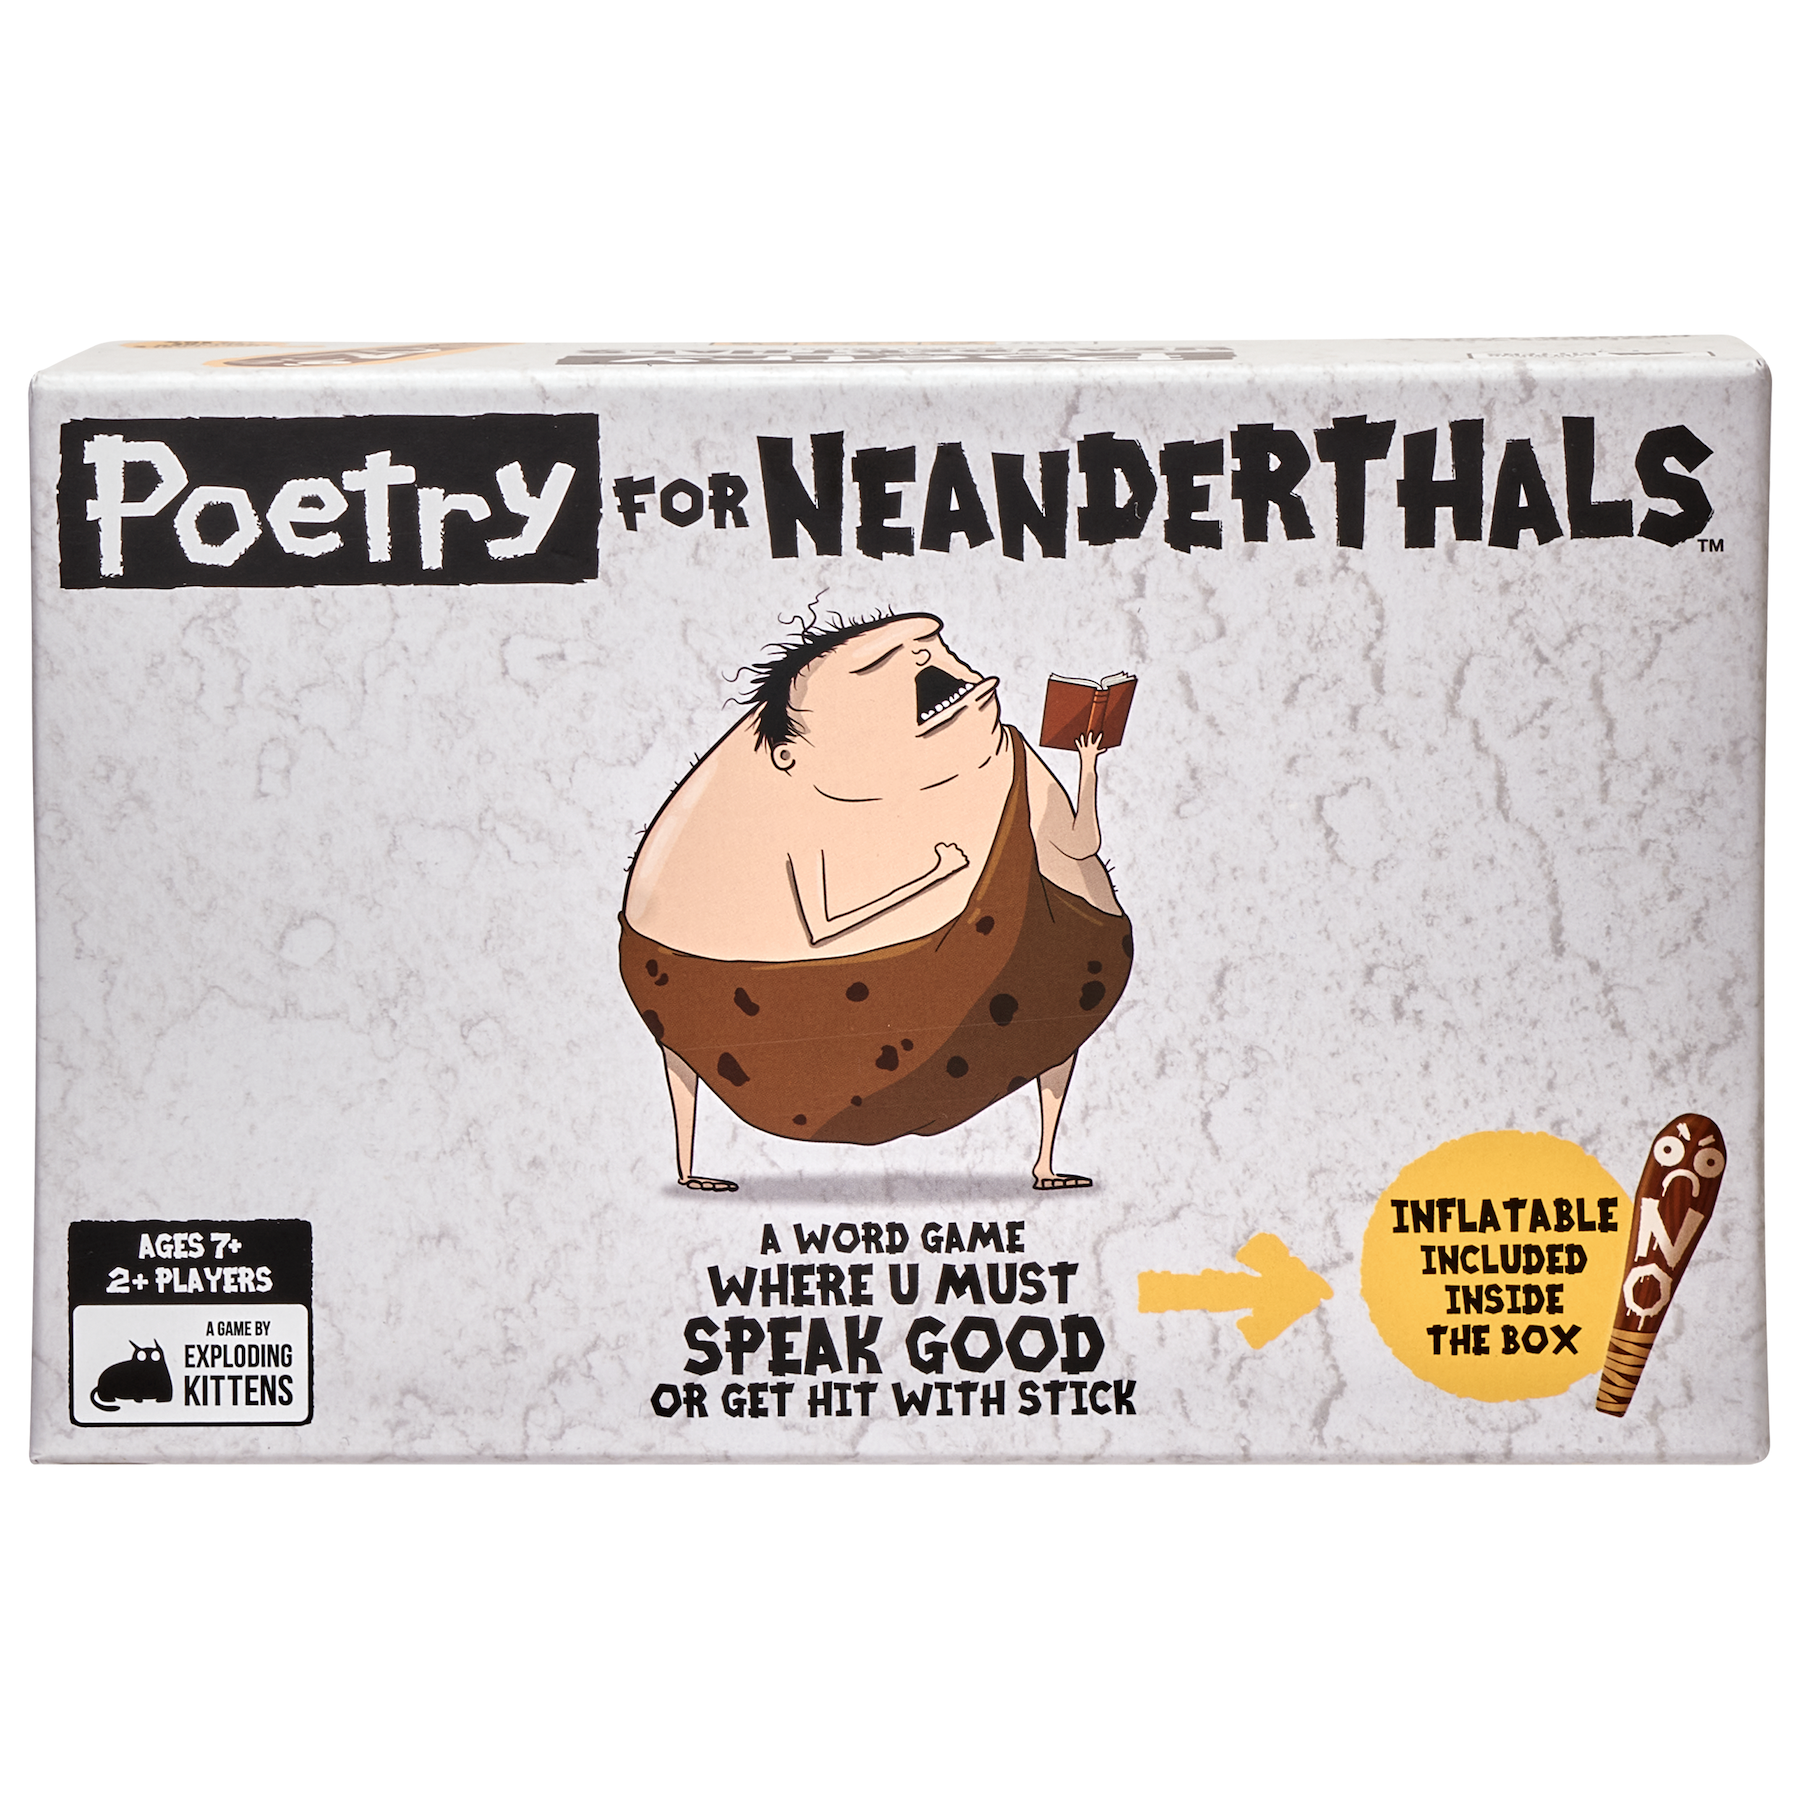 Poetry for Neanderthals Party Game by Exploding Kittens, 15 Minutes, Ages 7 and up, 2+ Players. - image 1 of 5